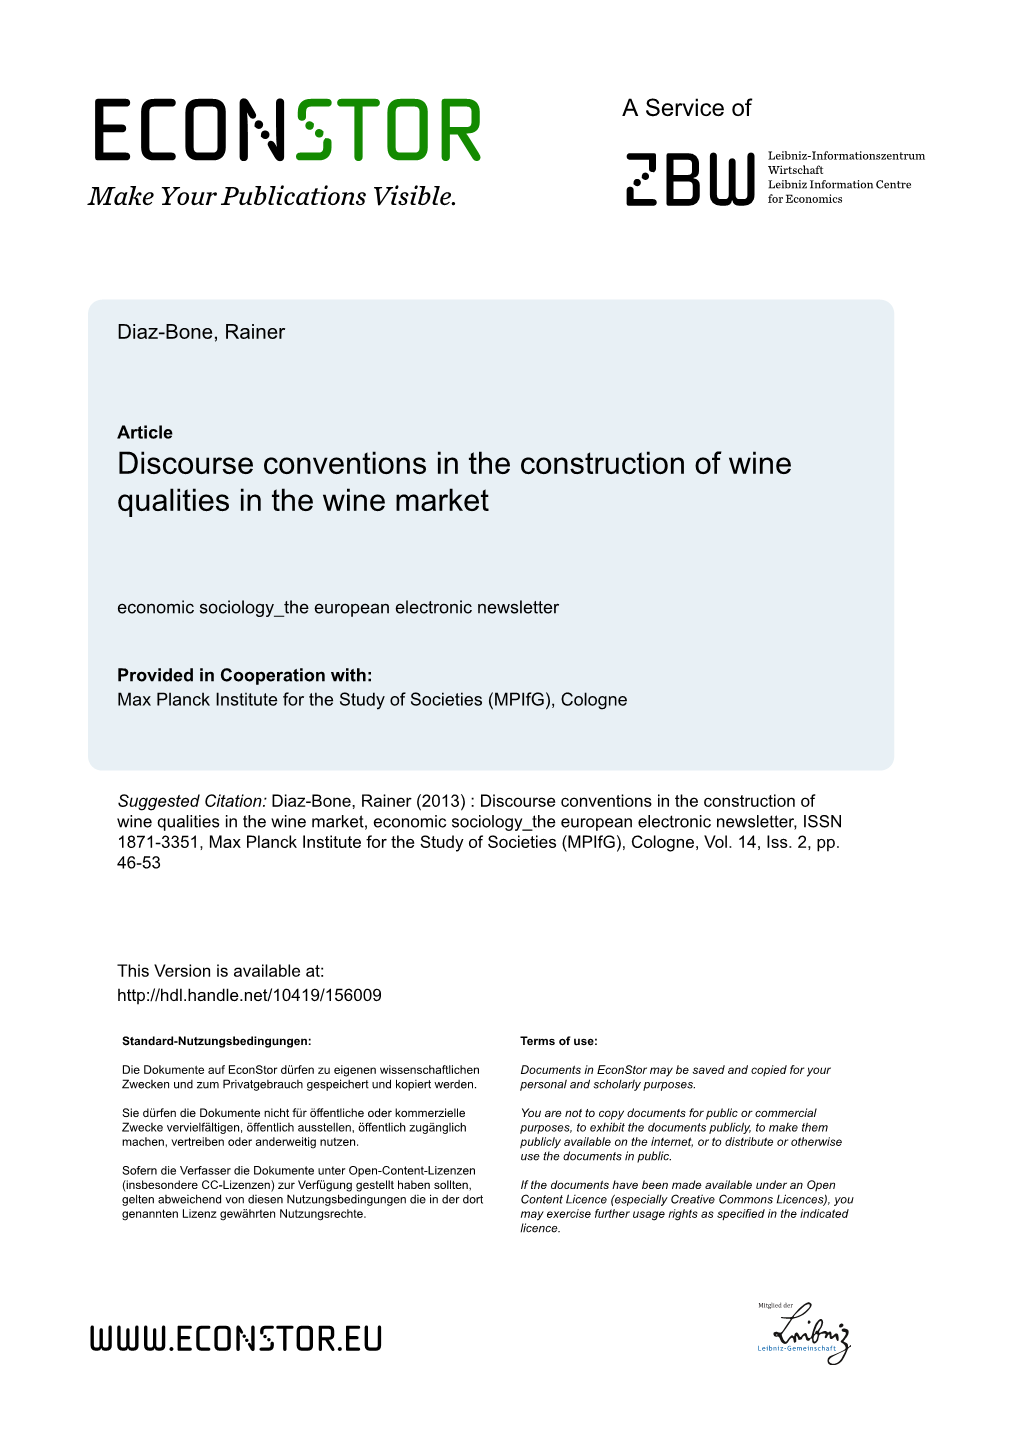 Discourse Conventions in the Construction of Wine Qualities in the Wine Market